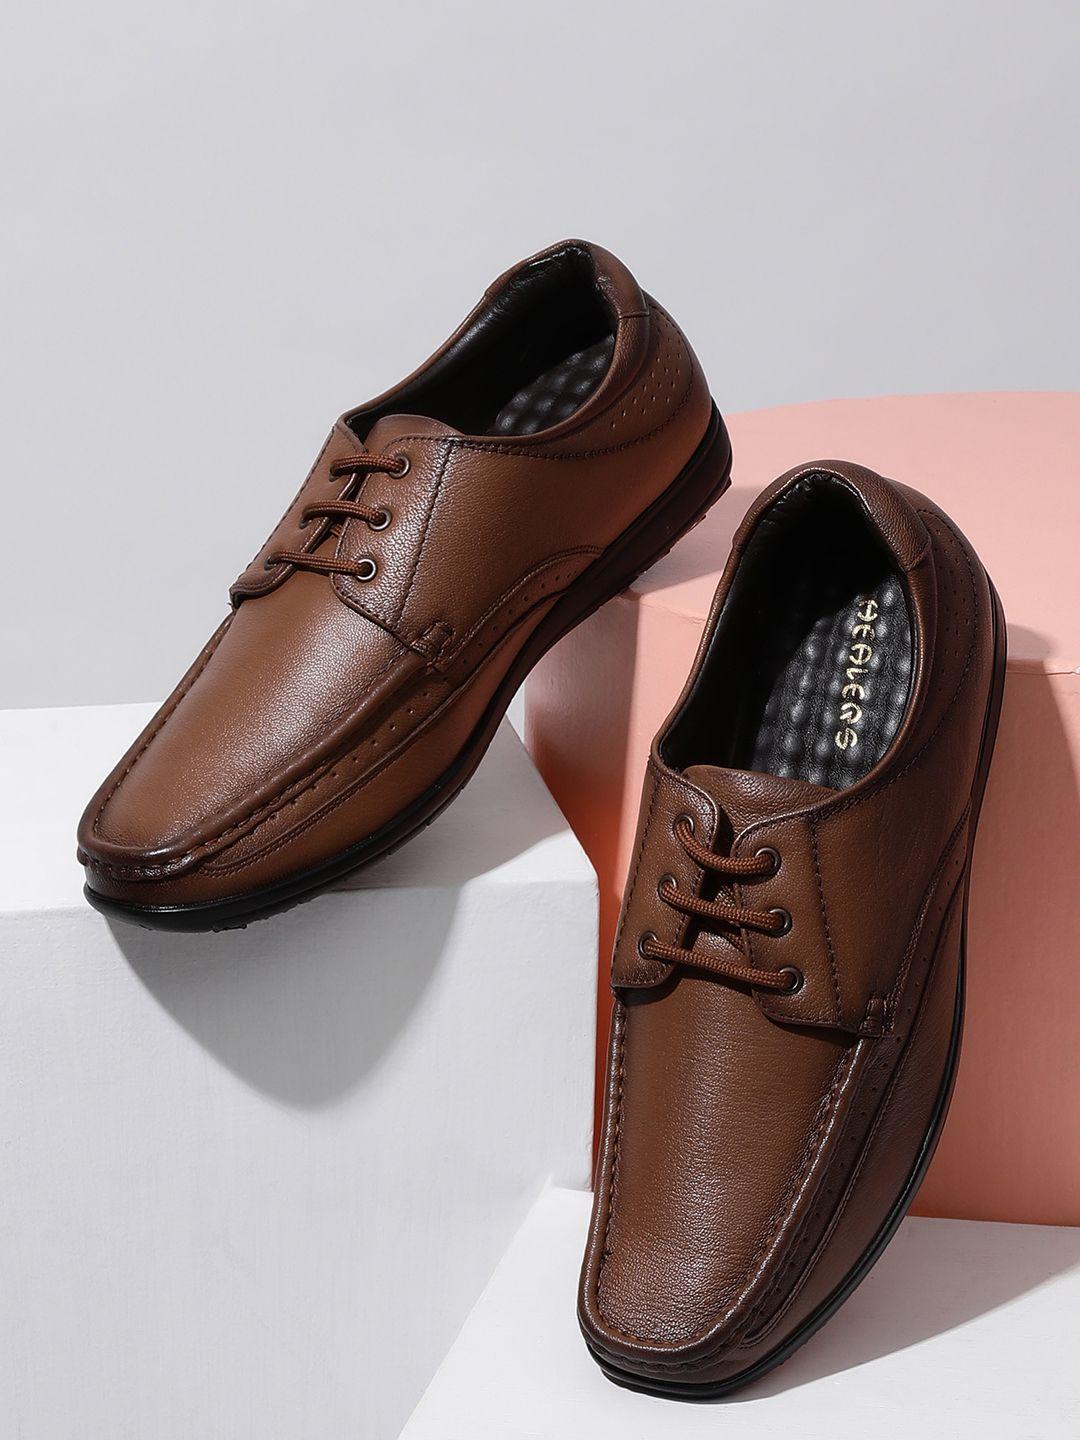 liberty-men-tan-colored-solid-leather-formal-derby-shoes